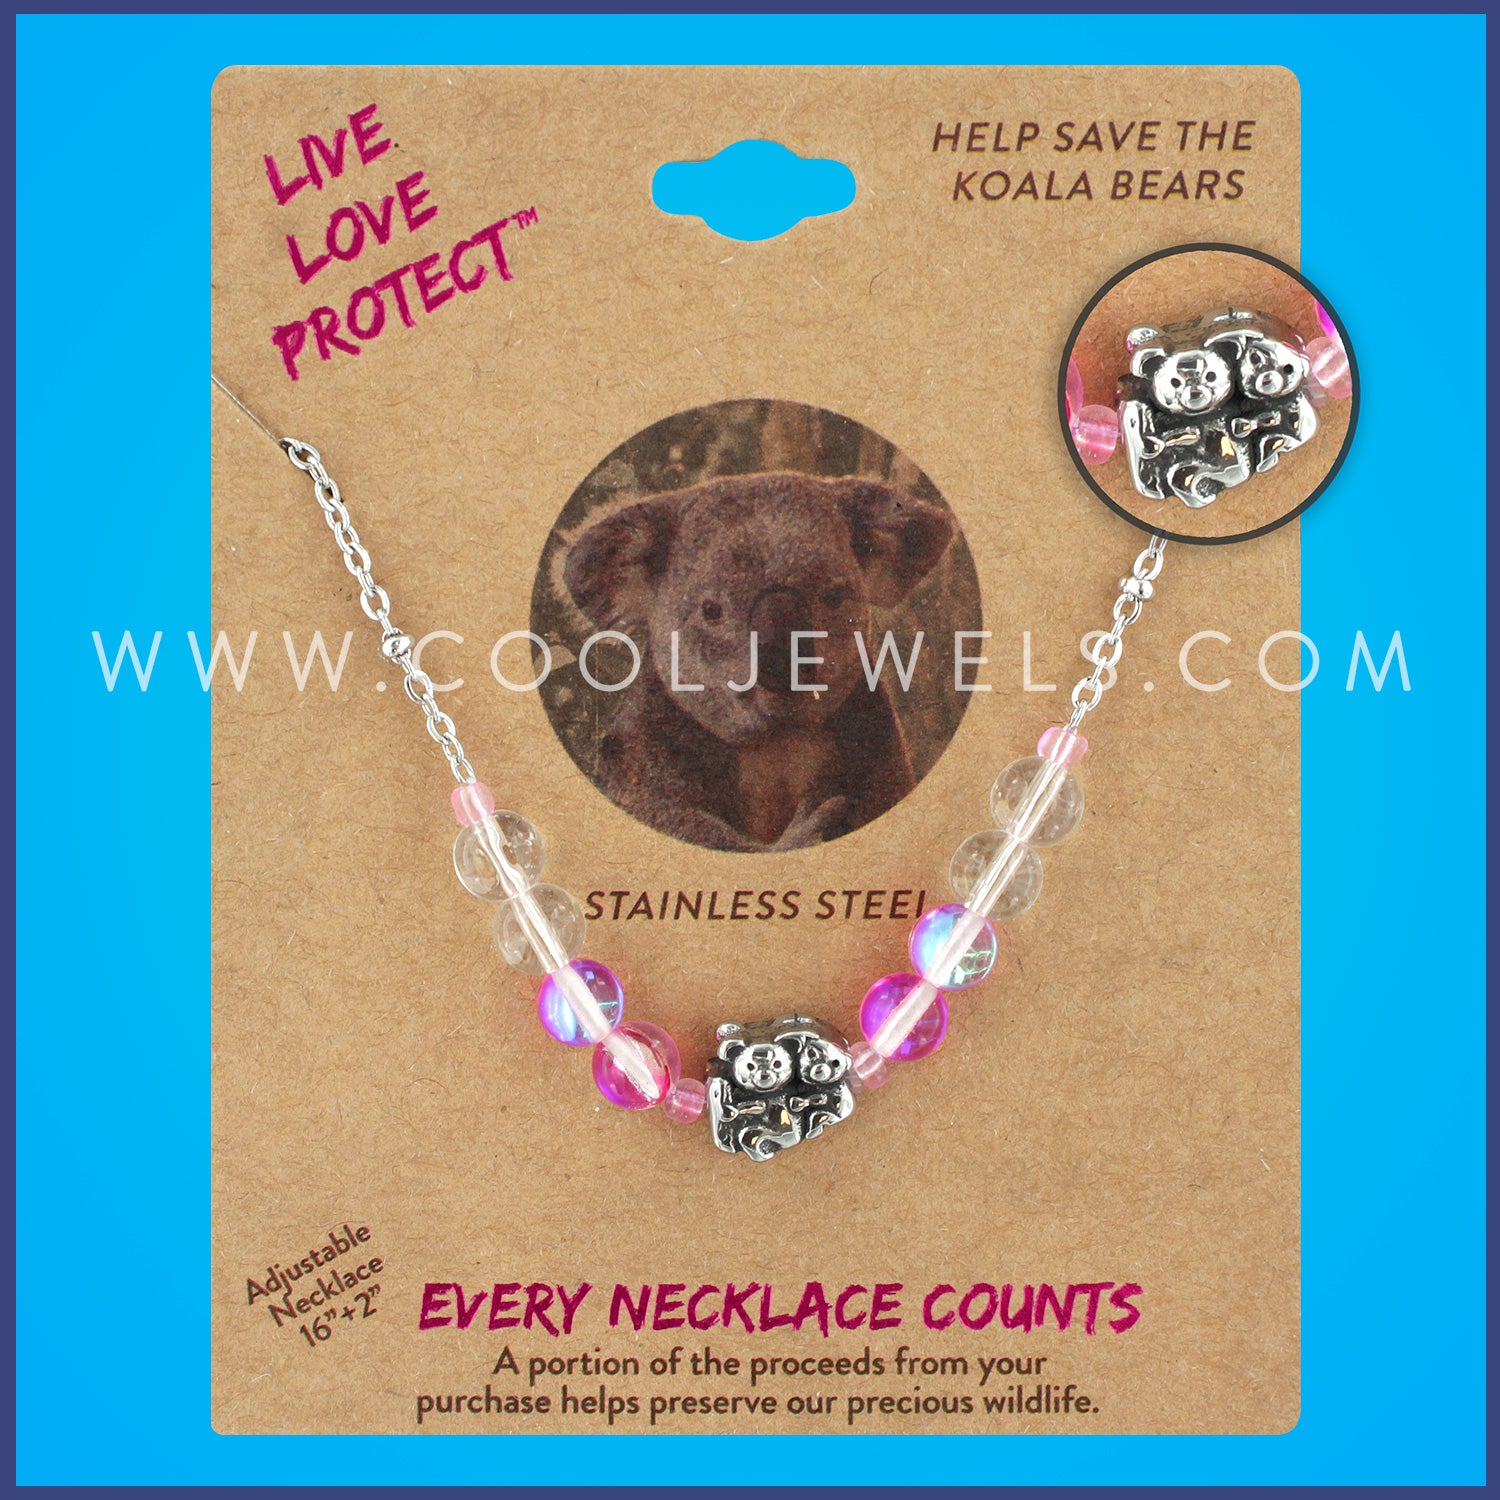 LIVE LOVE PROTECT™ NECKLACE WITH HONEY BEE